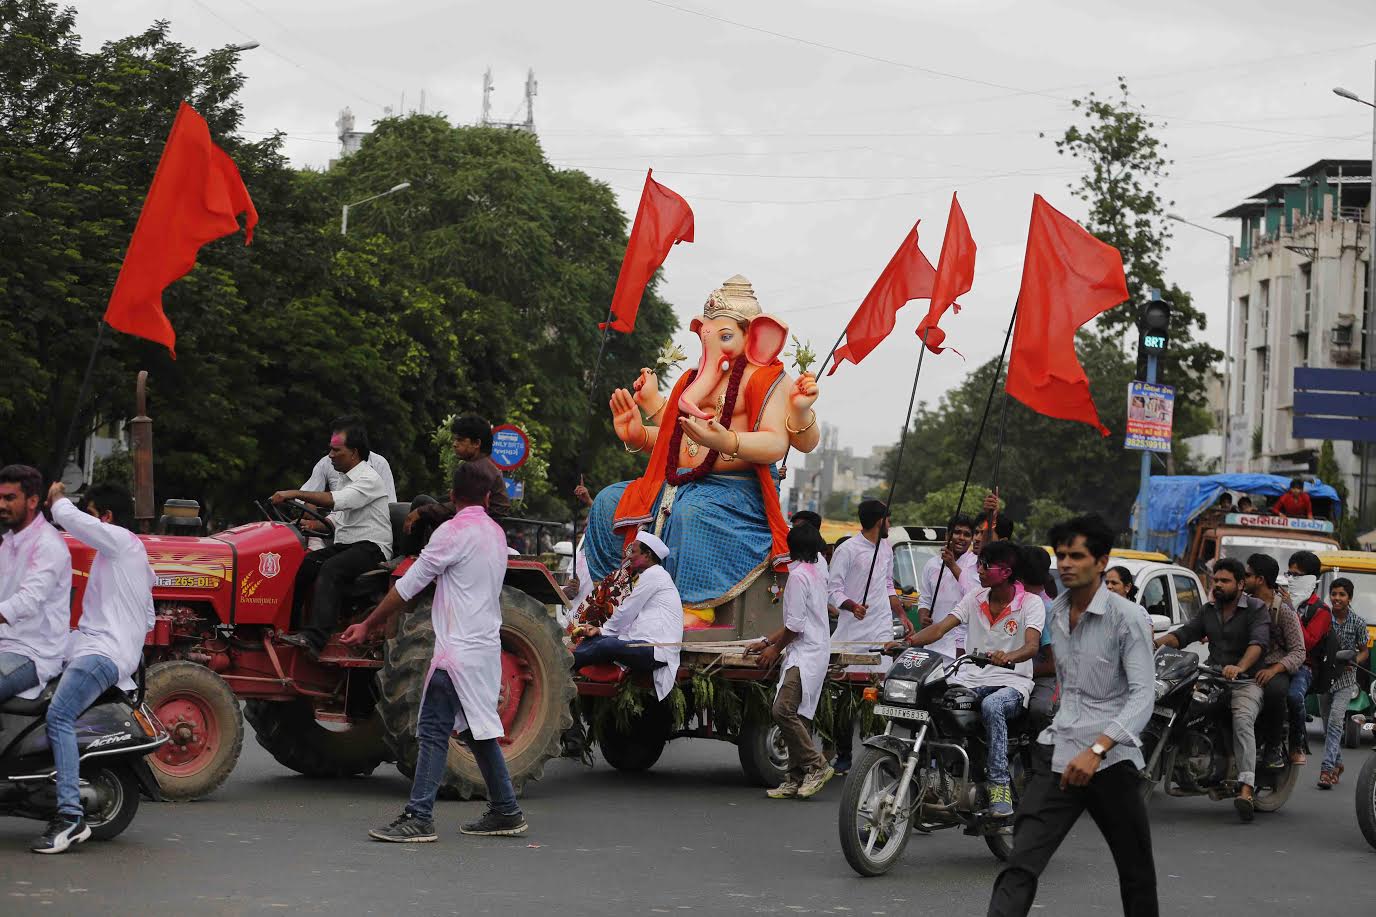 Ganesh Chaturthi 2022: Date, Rituals and Celebrations in Gujarat